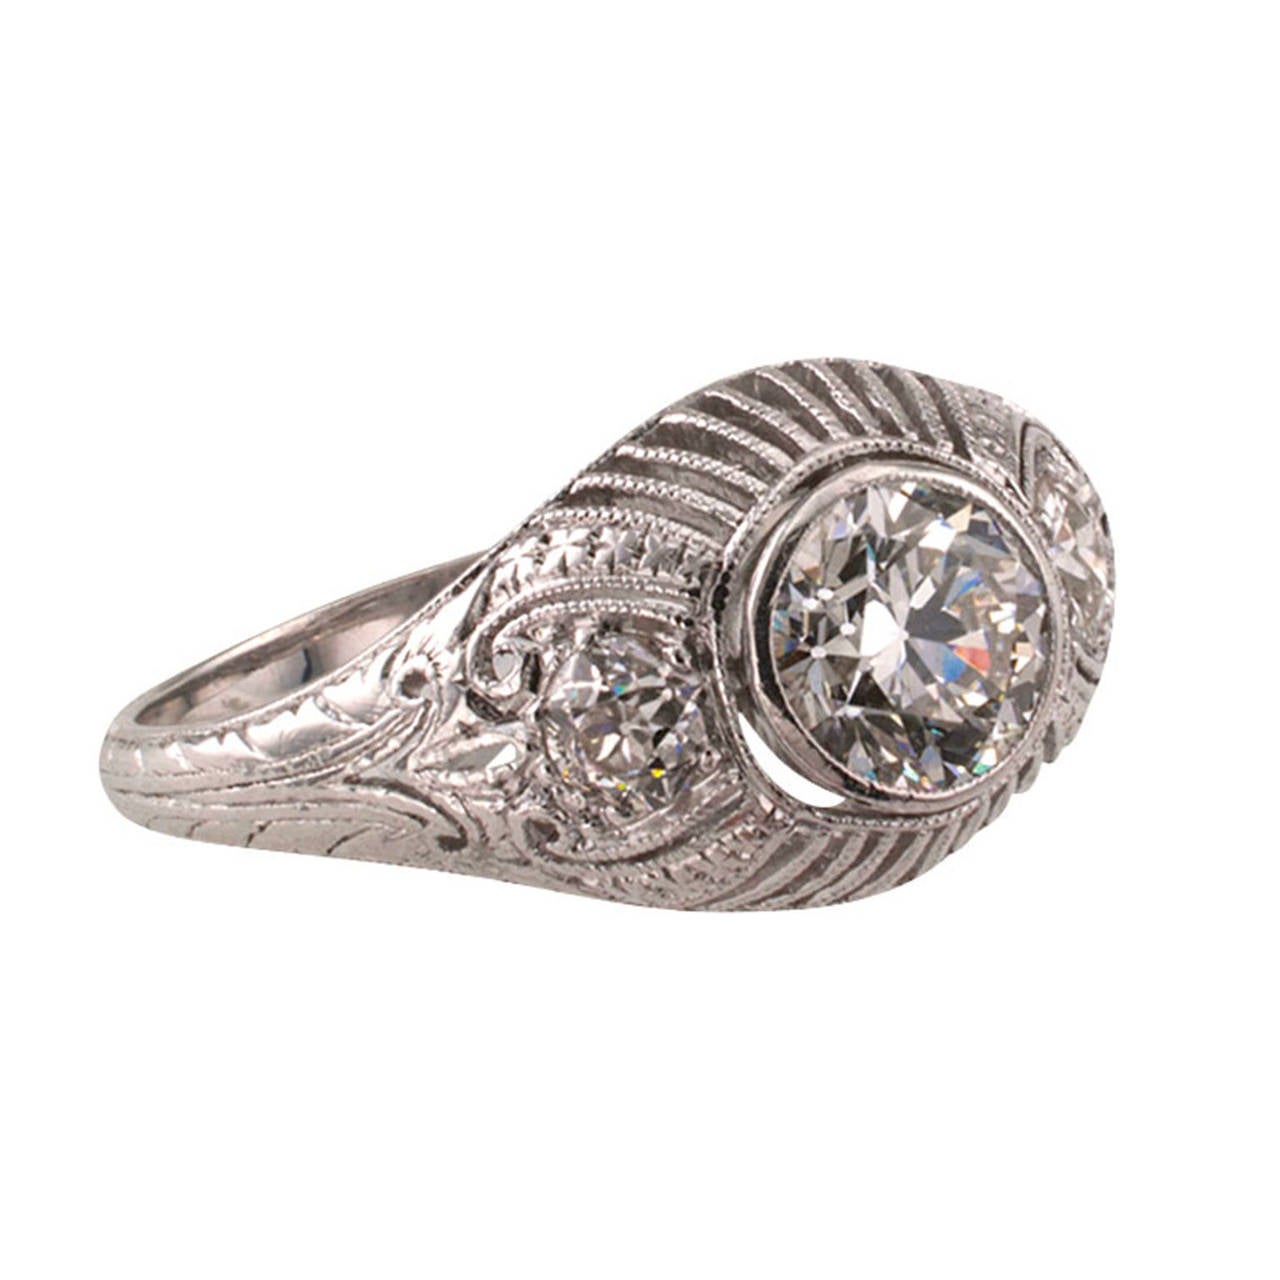 Three-stone Edwardian Diamond Platinum Engagement Ring

This wonderfully domed platinum diamond ring is lavishly decorated with fine open work, chased motifs and millegrain, in the style that was so popular with the Edwardians.  It's set with